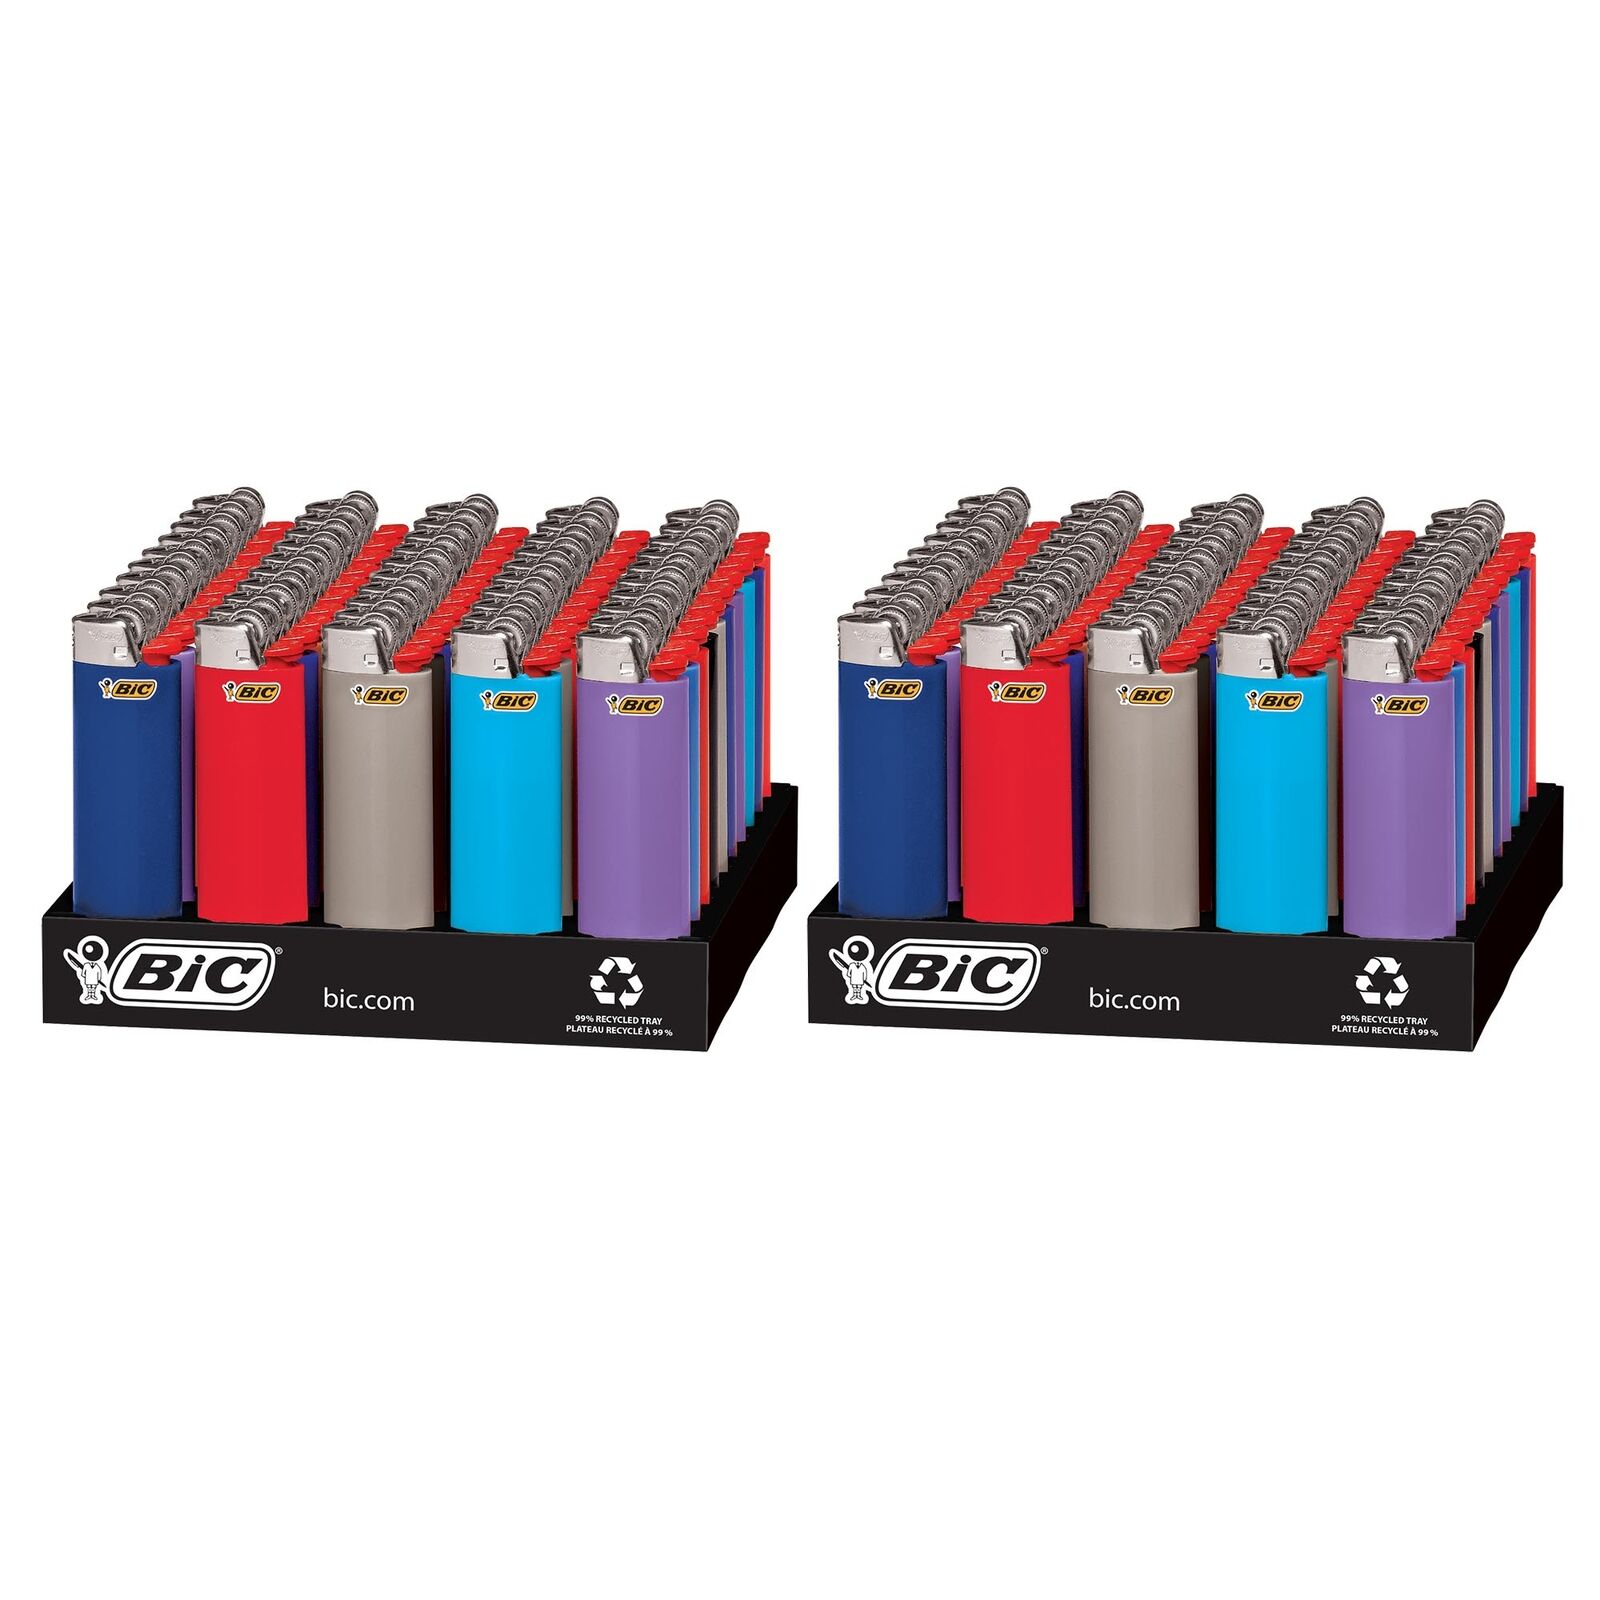 BIC Classic Lighter, Assorted Colors, Pocket Lighters, 100-Count Tray